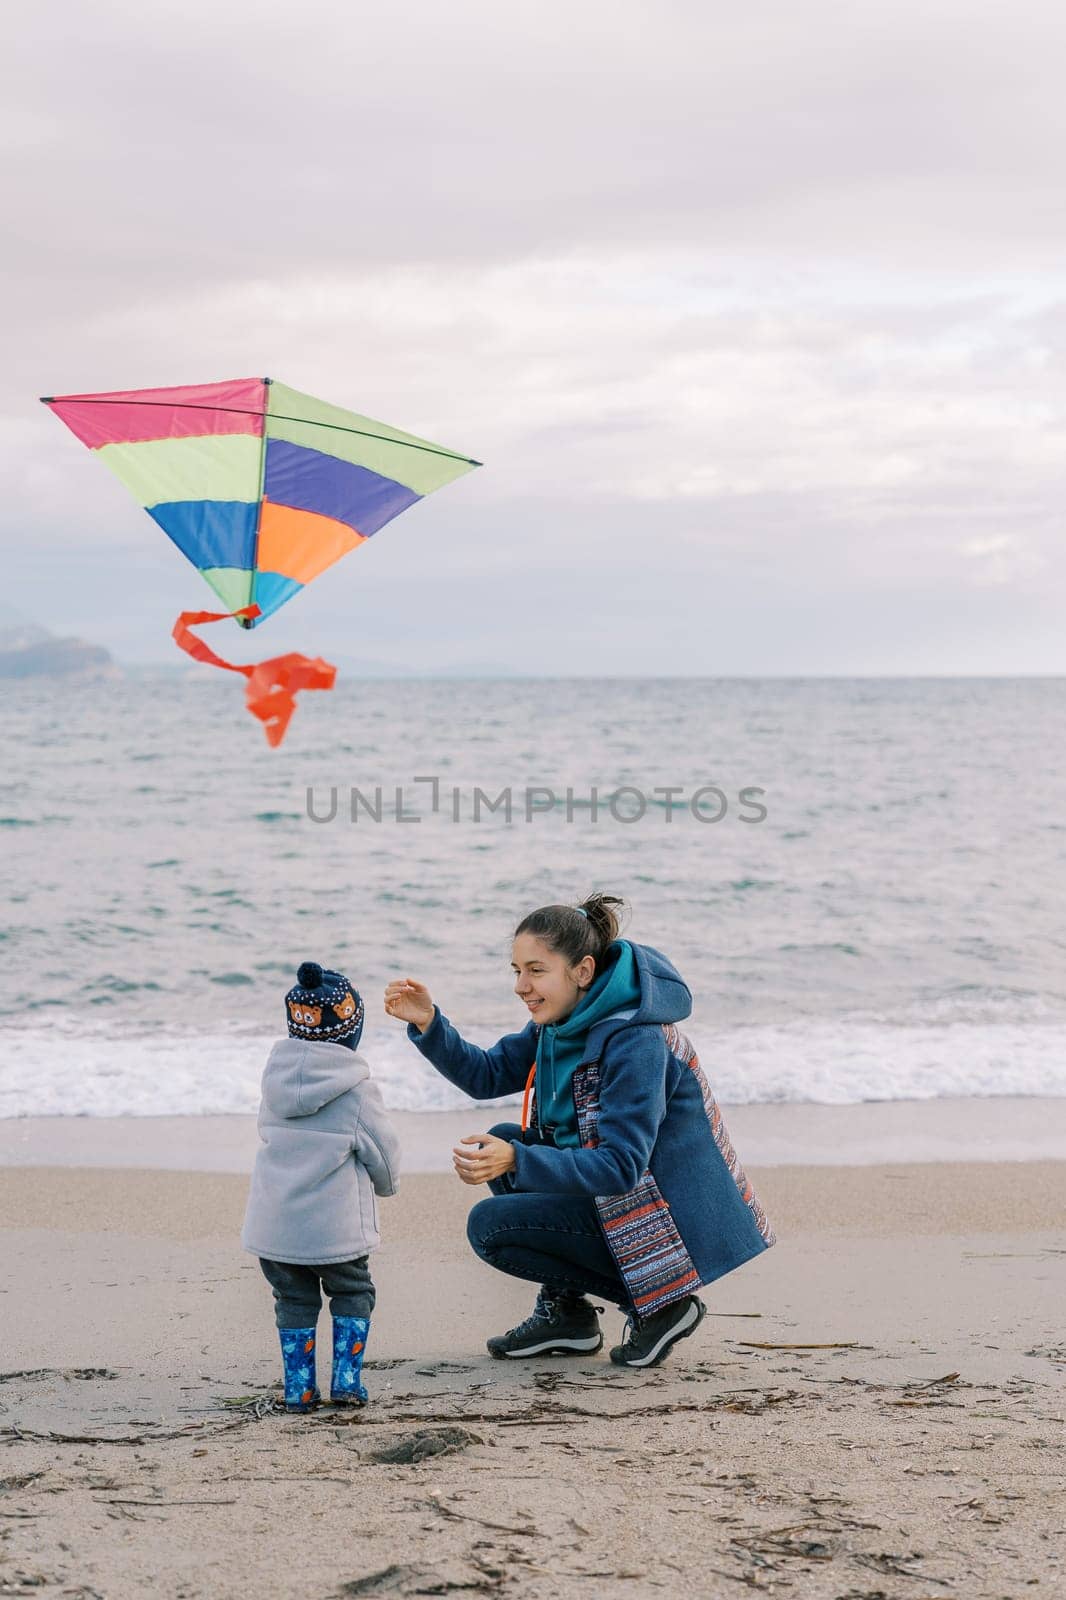 Mom crouched next to a little girl with a colorful kite in her hand near the sea by Nadtochiy